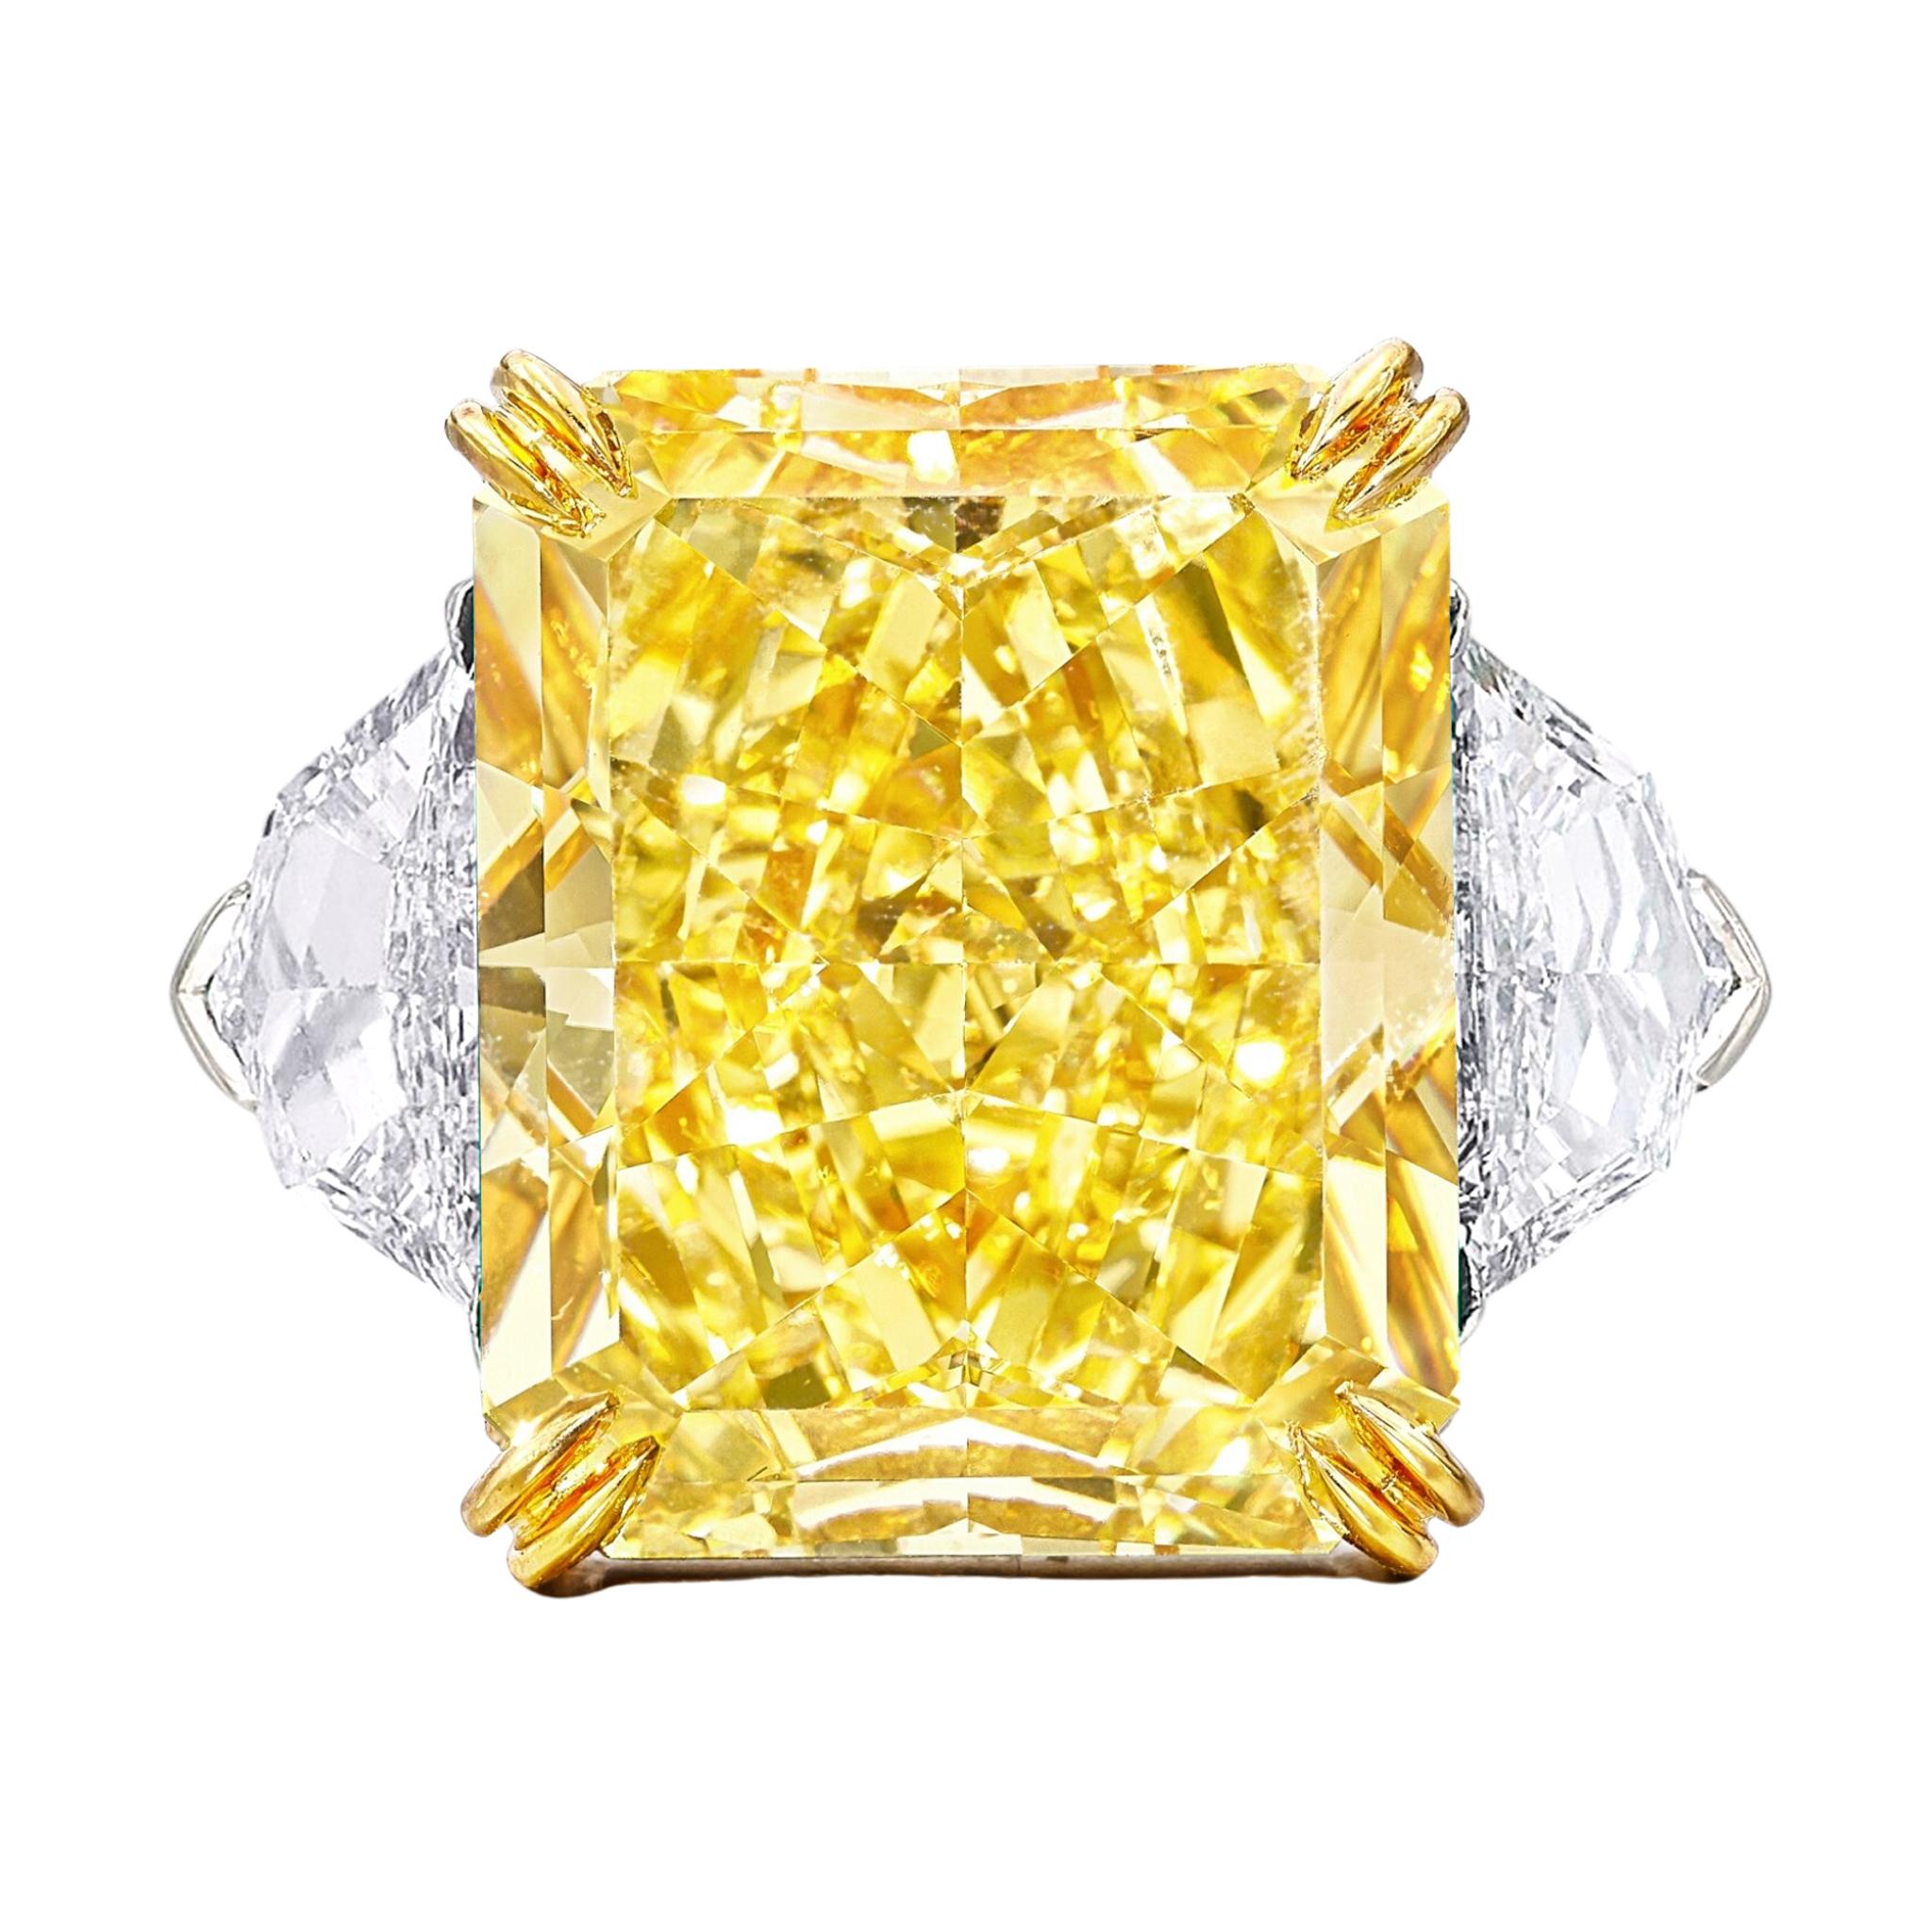 Emerald Cut Exceptional GIA Certified 10.80 Carat Fancy Yellow Diamond Ring For Sale